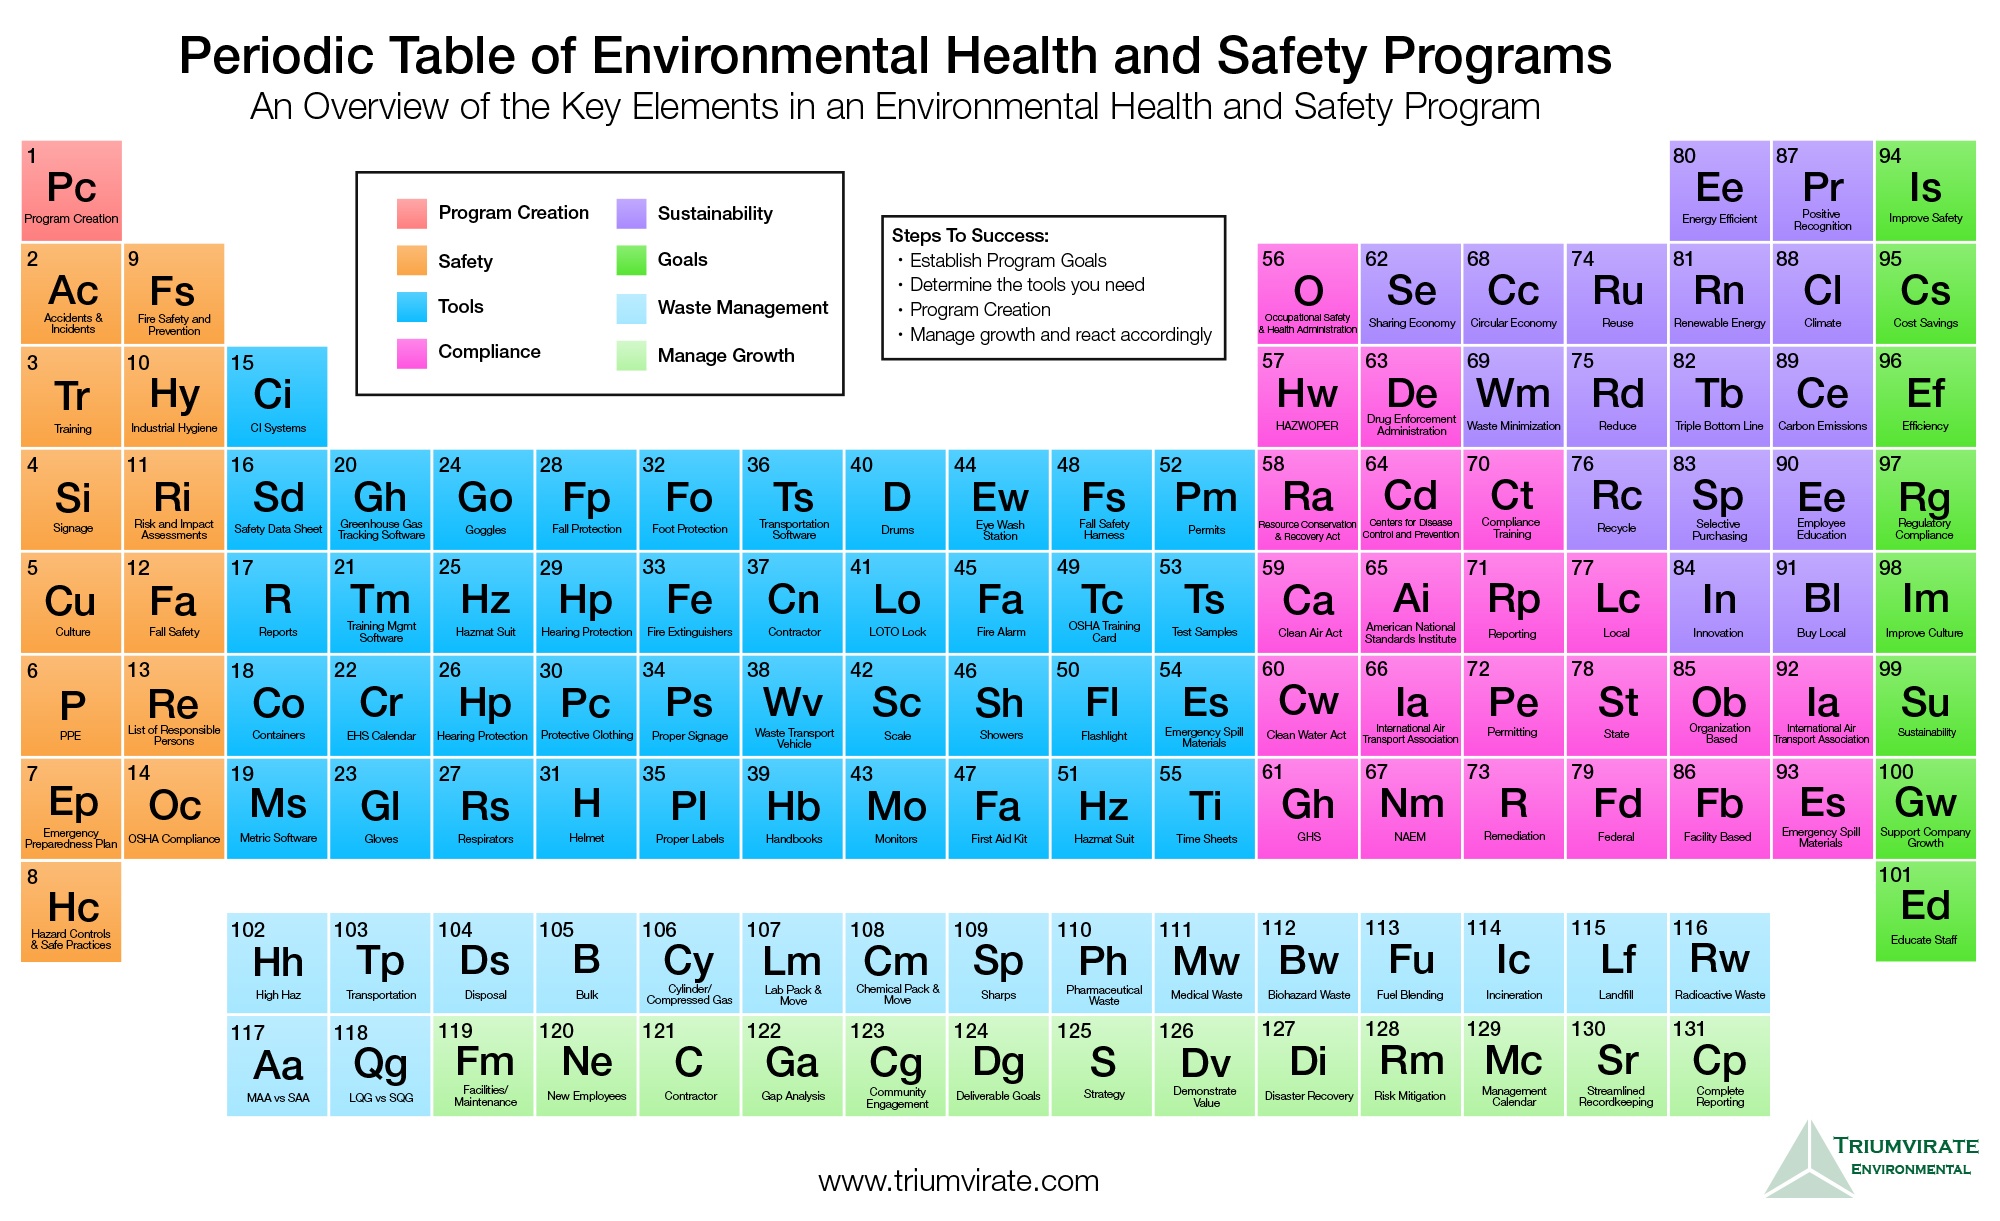 Periodic Table of EH&S